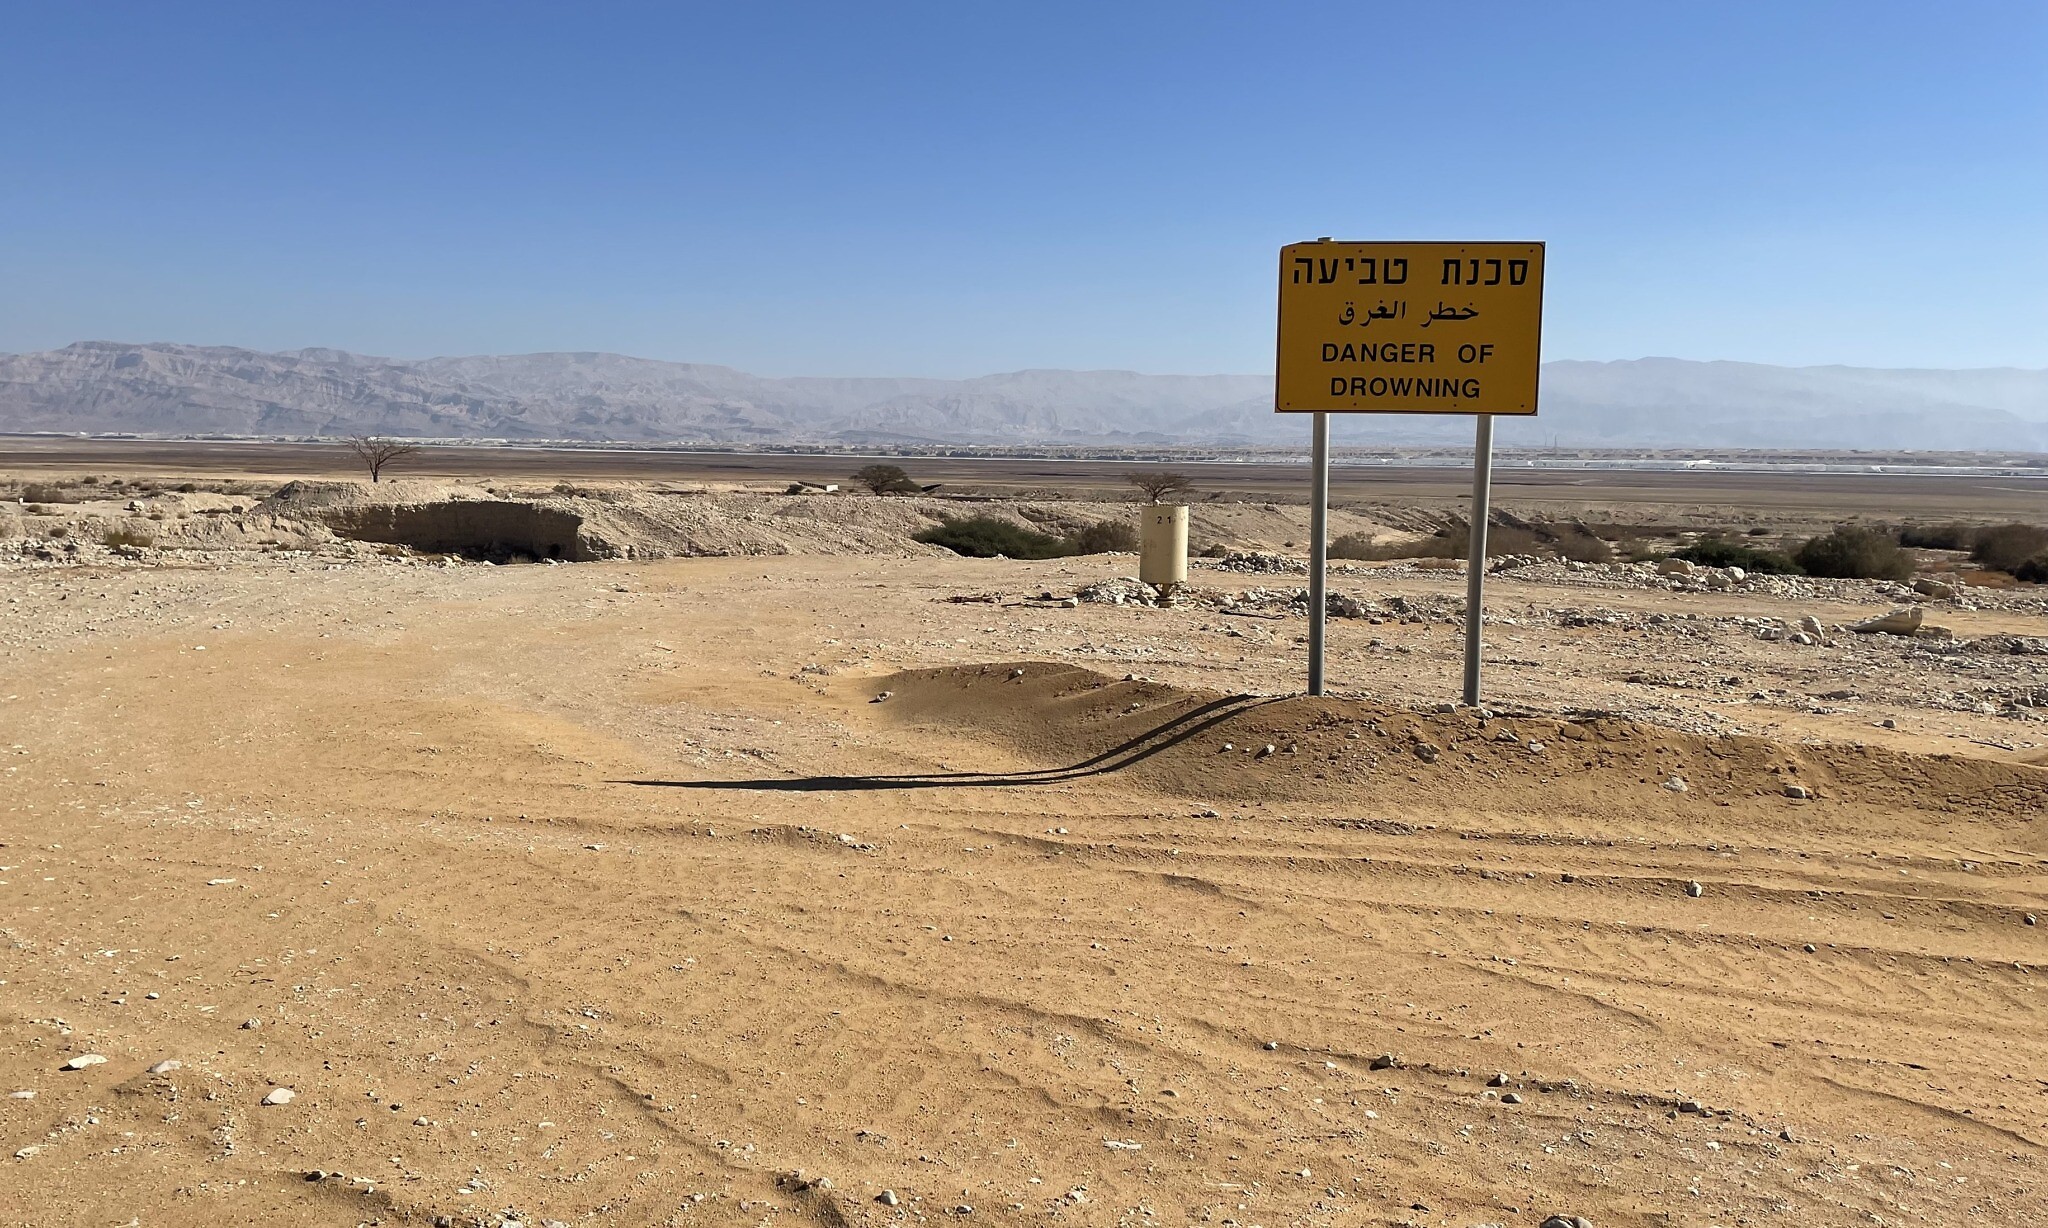 A danger of drowning sign on the way to the Dead Sea Works from where the sea has long since receded, January 20, 2022. (Sue Surkes/Times of Israel)